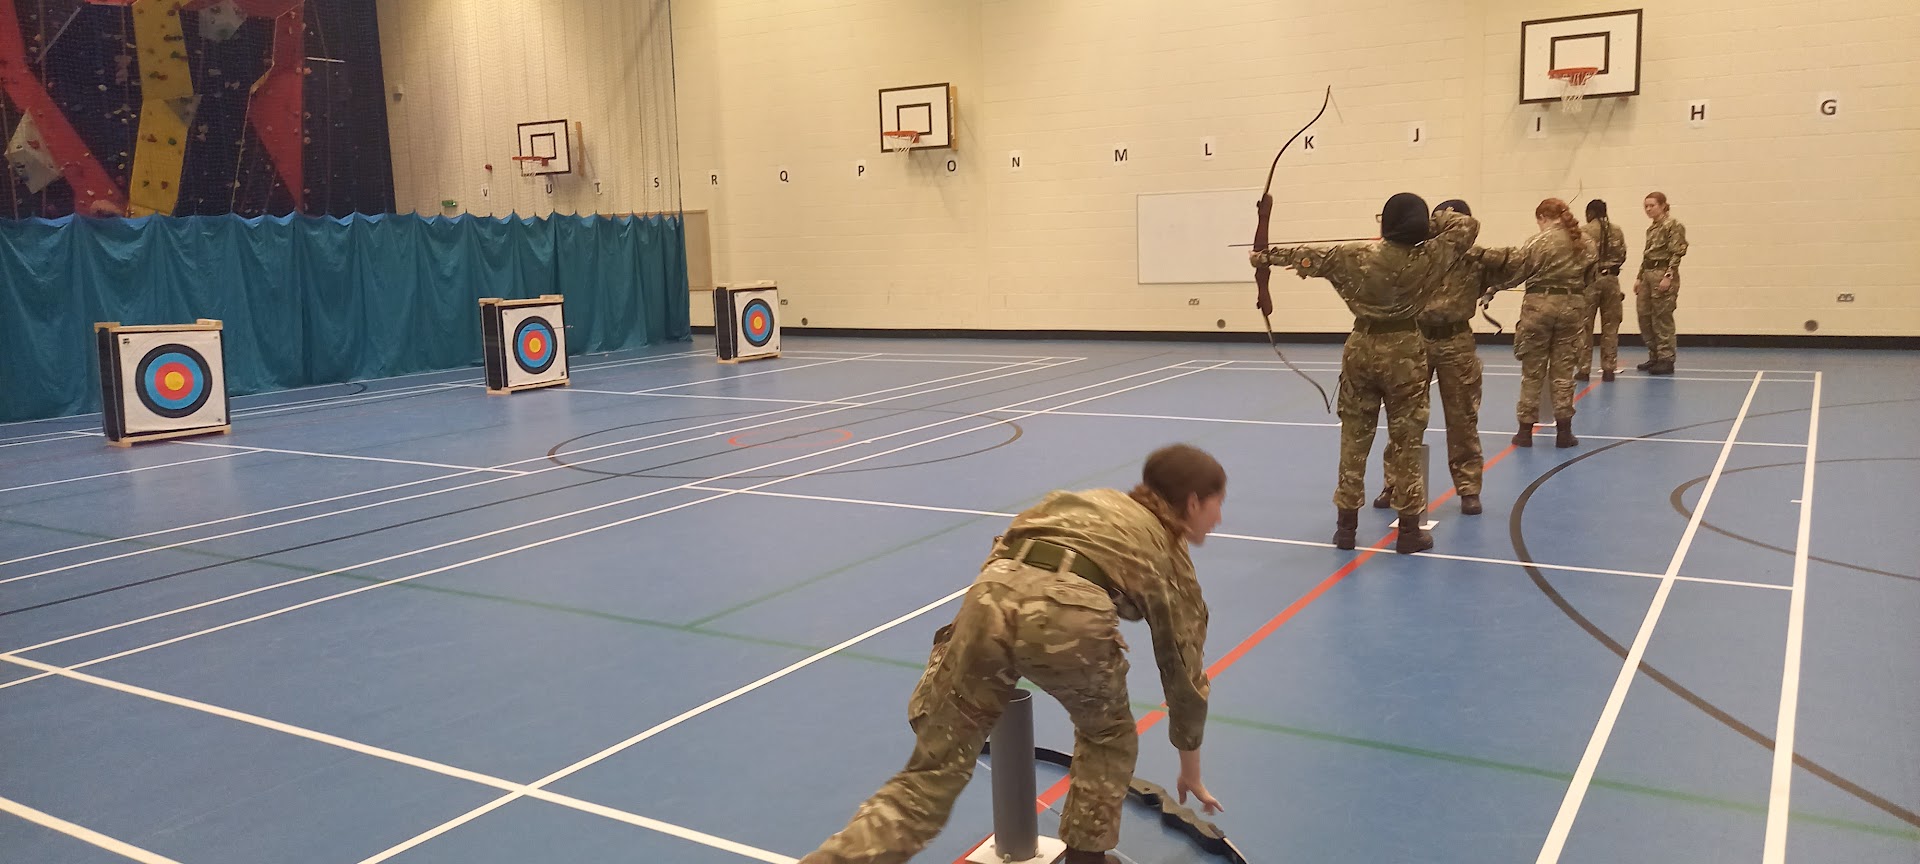 The Gilberd School CCF contingent improves cadet experience with growth funding